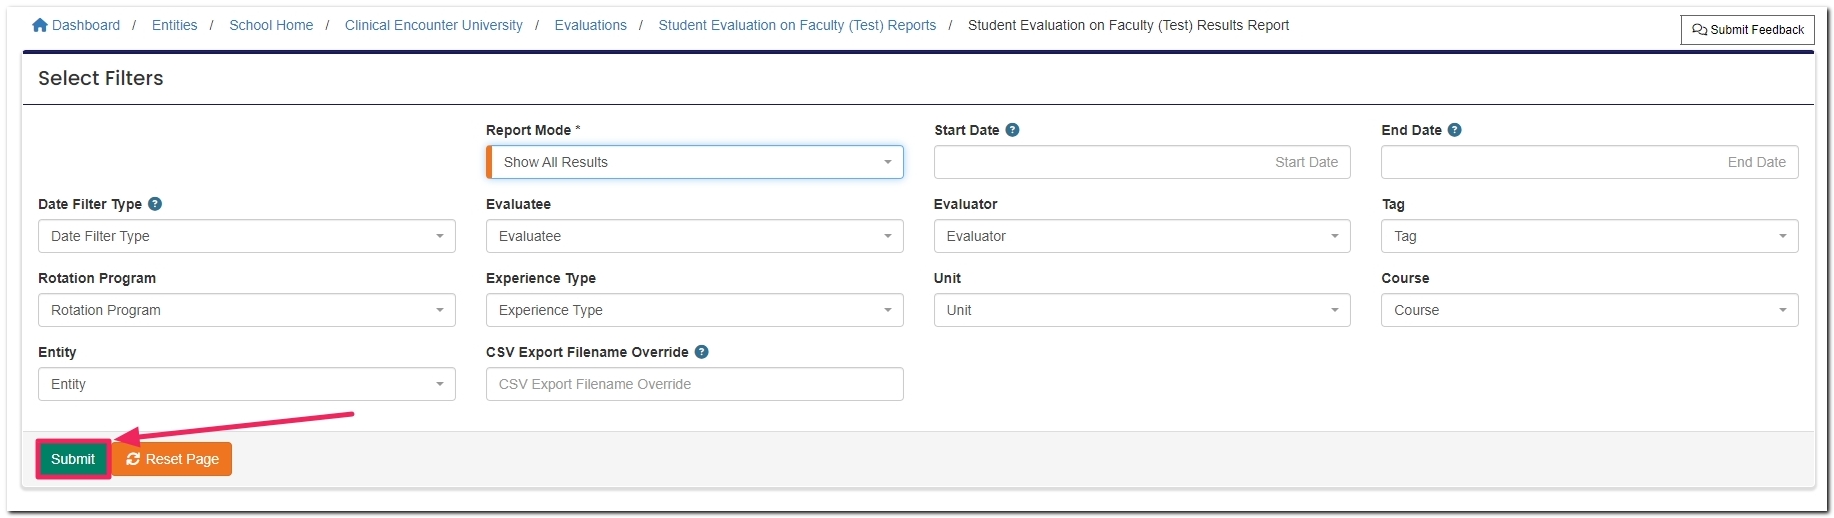 evaluations report filters highlighting Submit button